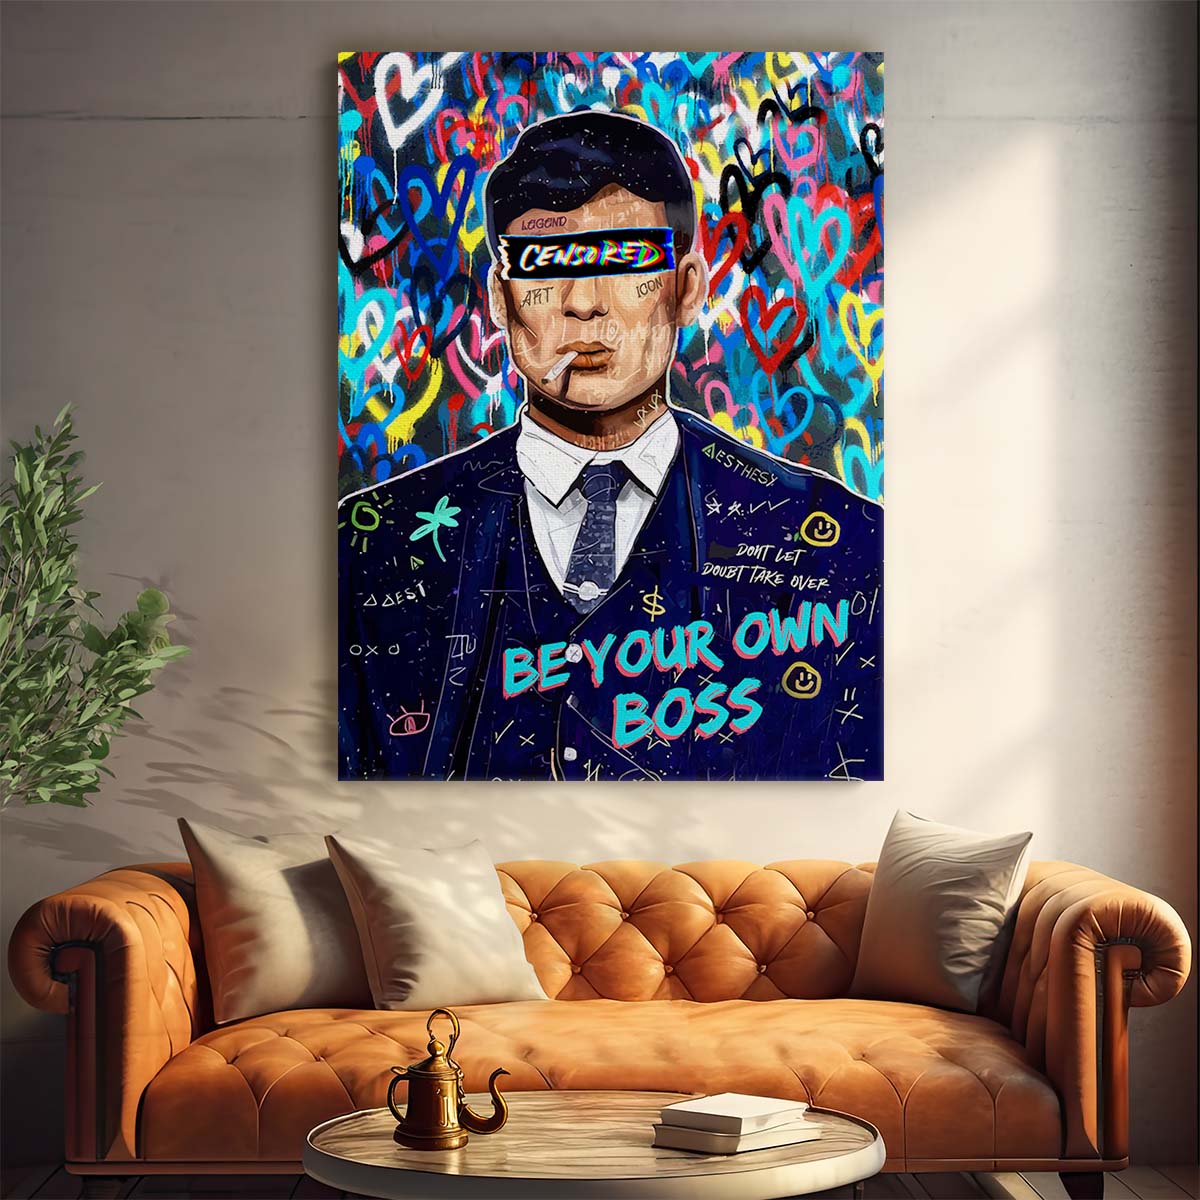 Thomas Shelby Godfather Graffiti Wall Art by Luxuriance Designs. Made in USA.